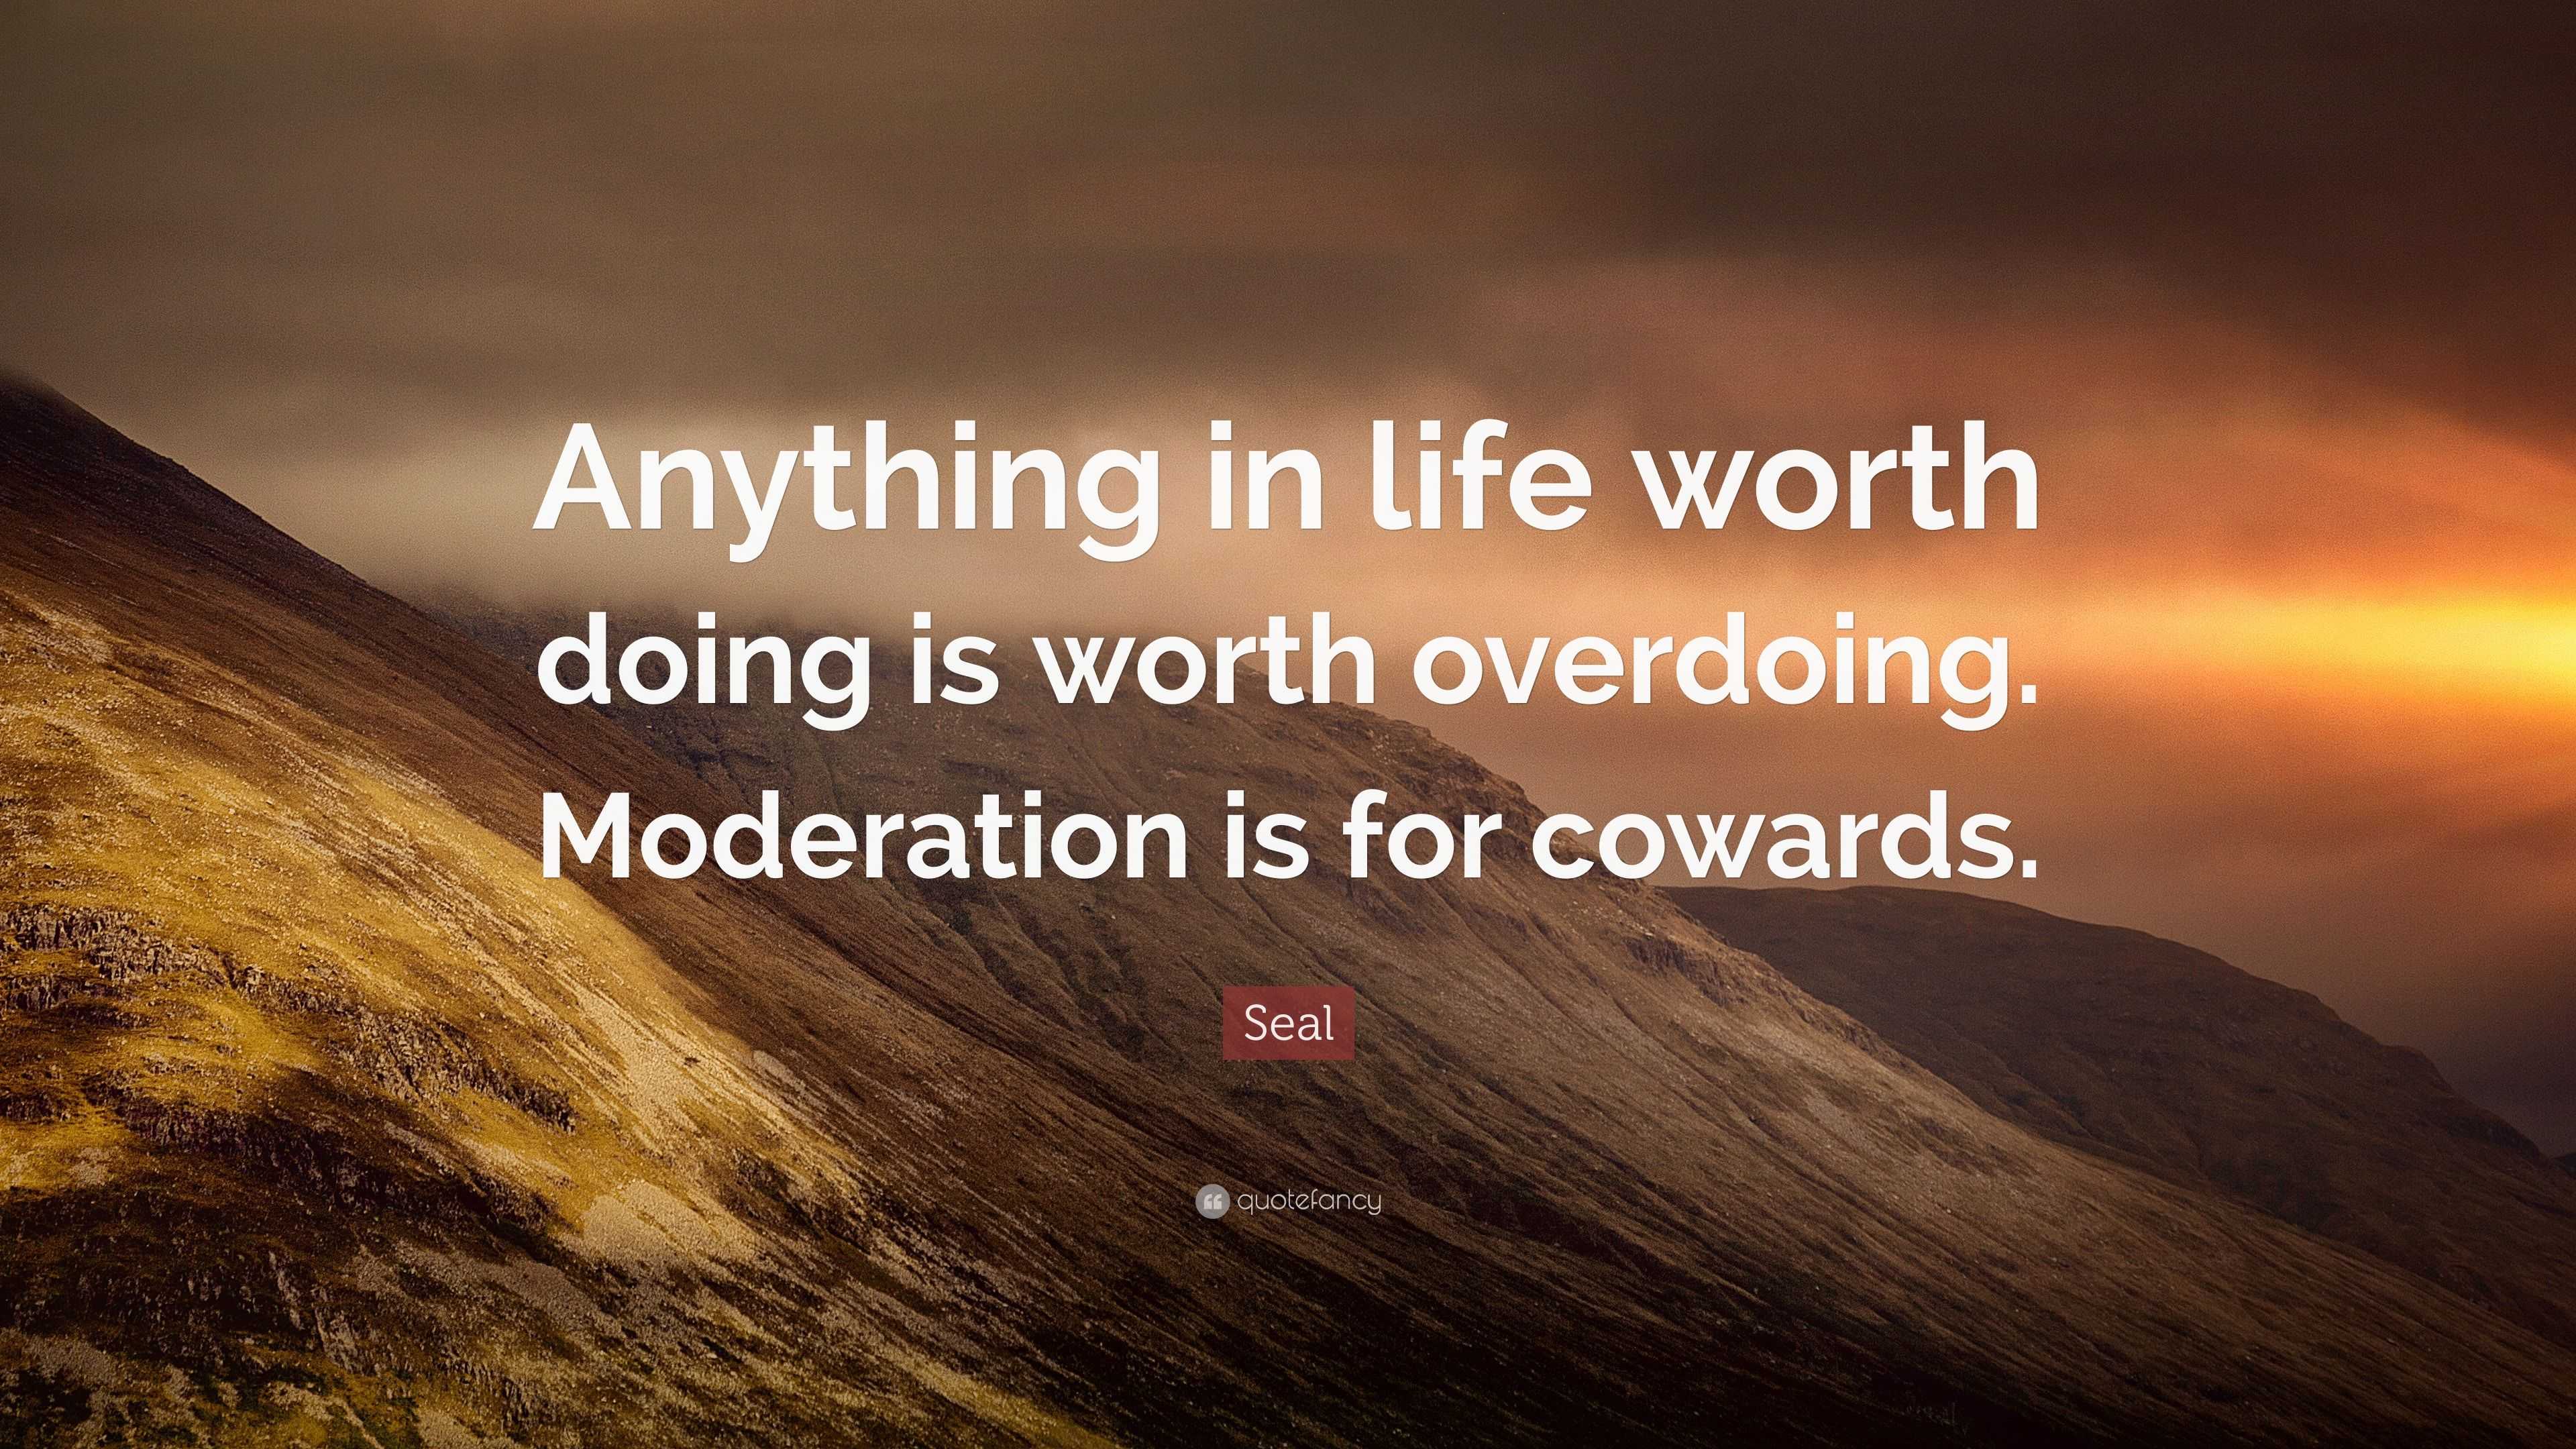 Seal Quote: "Anything in life worth doing is worth overdoing. Moderation is for cowards." (12 ...